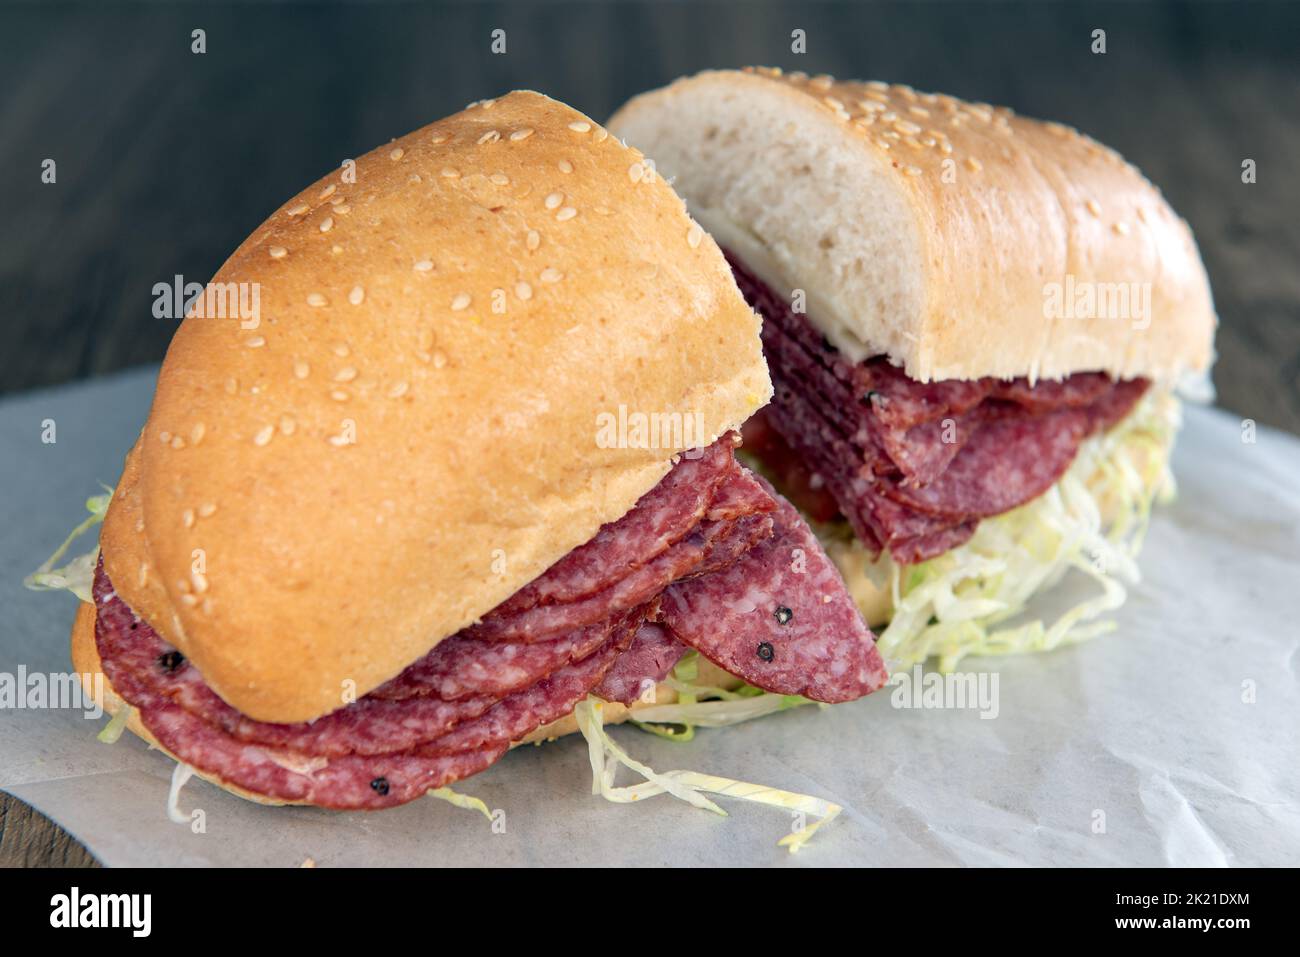 Lunch is served with a loaded salami sandwich overflowing with romaine lettuce. Stock Photo